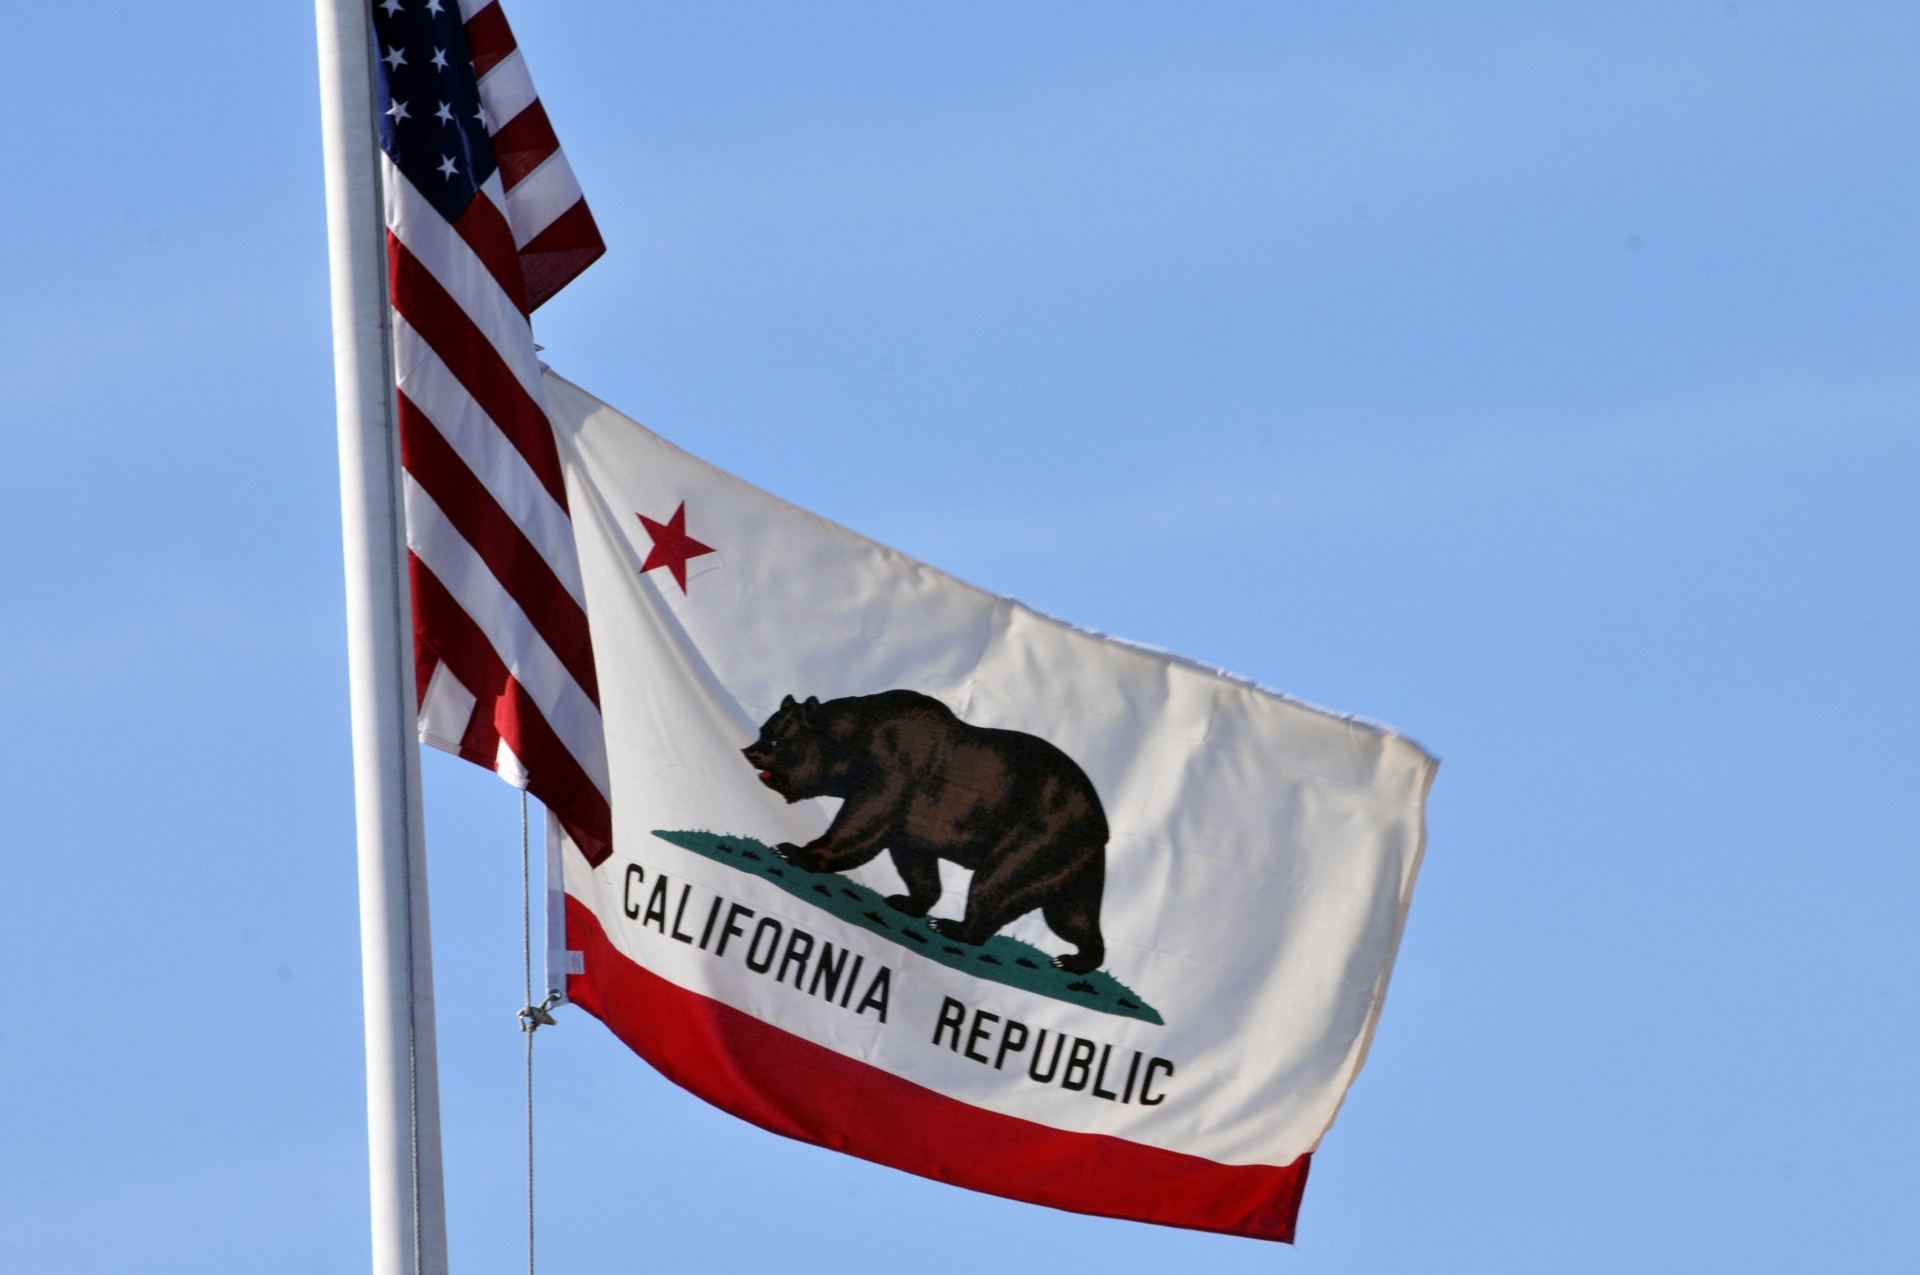 California state flag and US flag fly together in the blue sky.